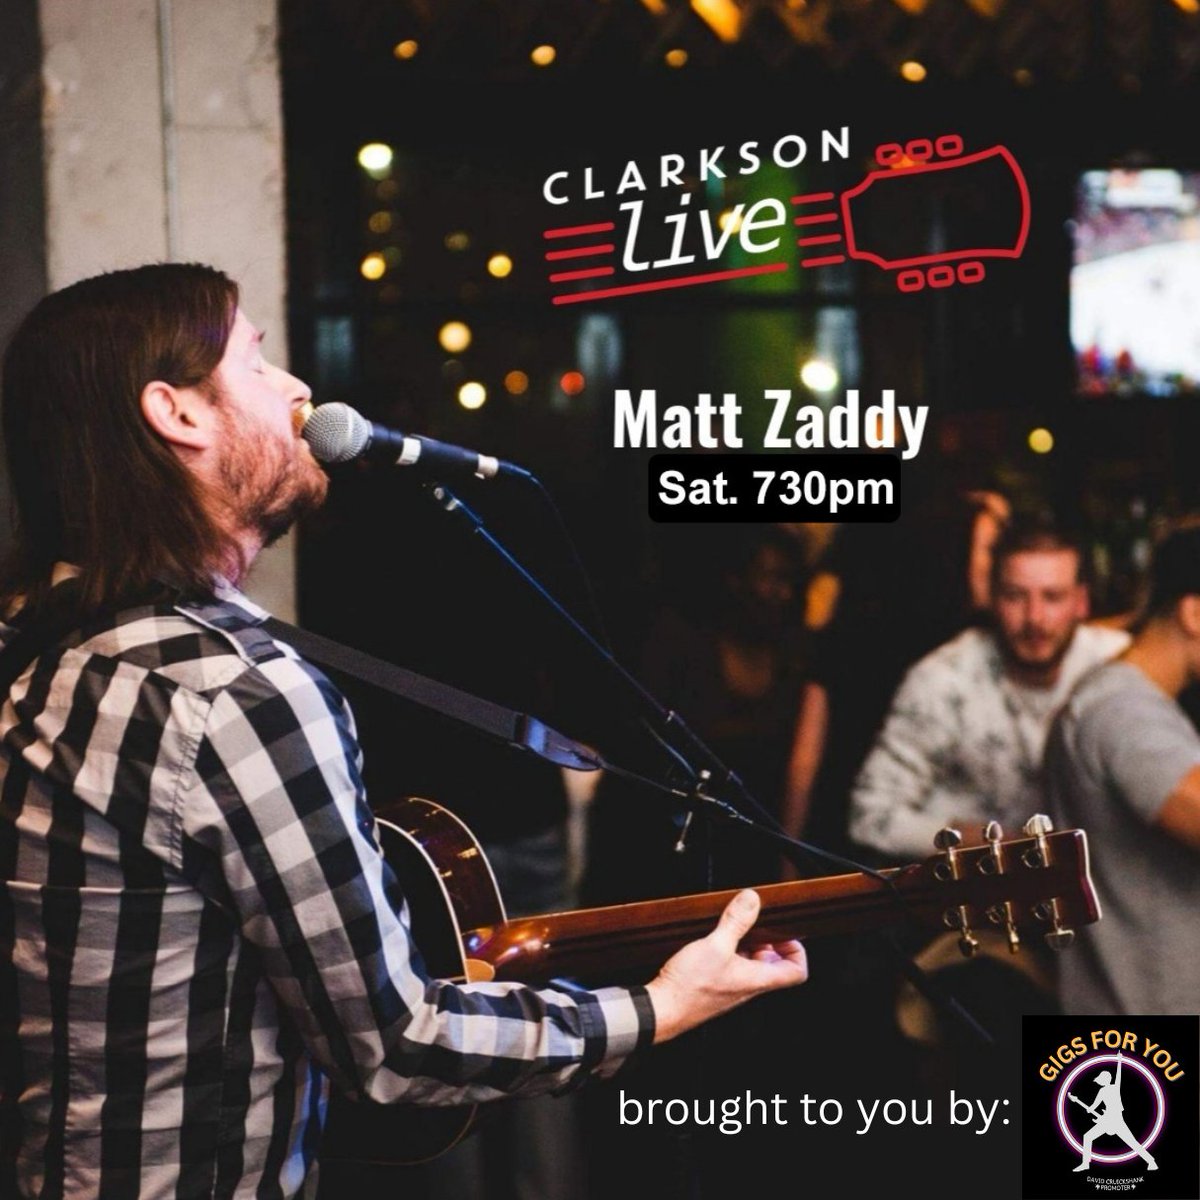 Playing Solo acoustic this Sat. Apr. 6th 730pm-1030pm at @ClarksonPump in #Clarkson #Mississauga! See you there! #livemusic #mattzaddy #clarksonpump